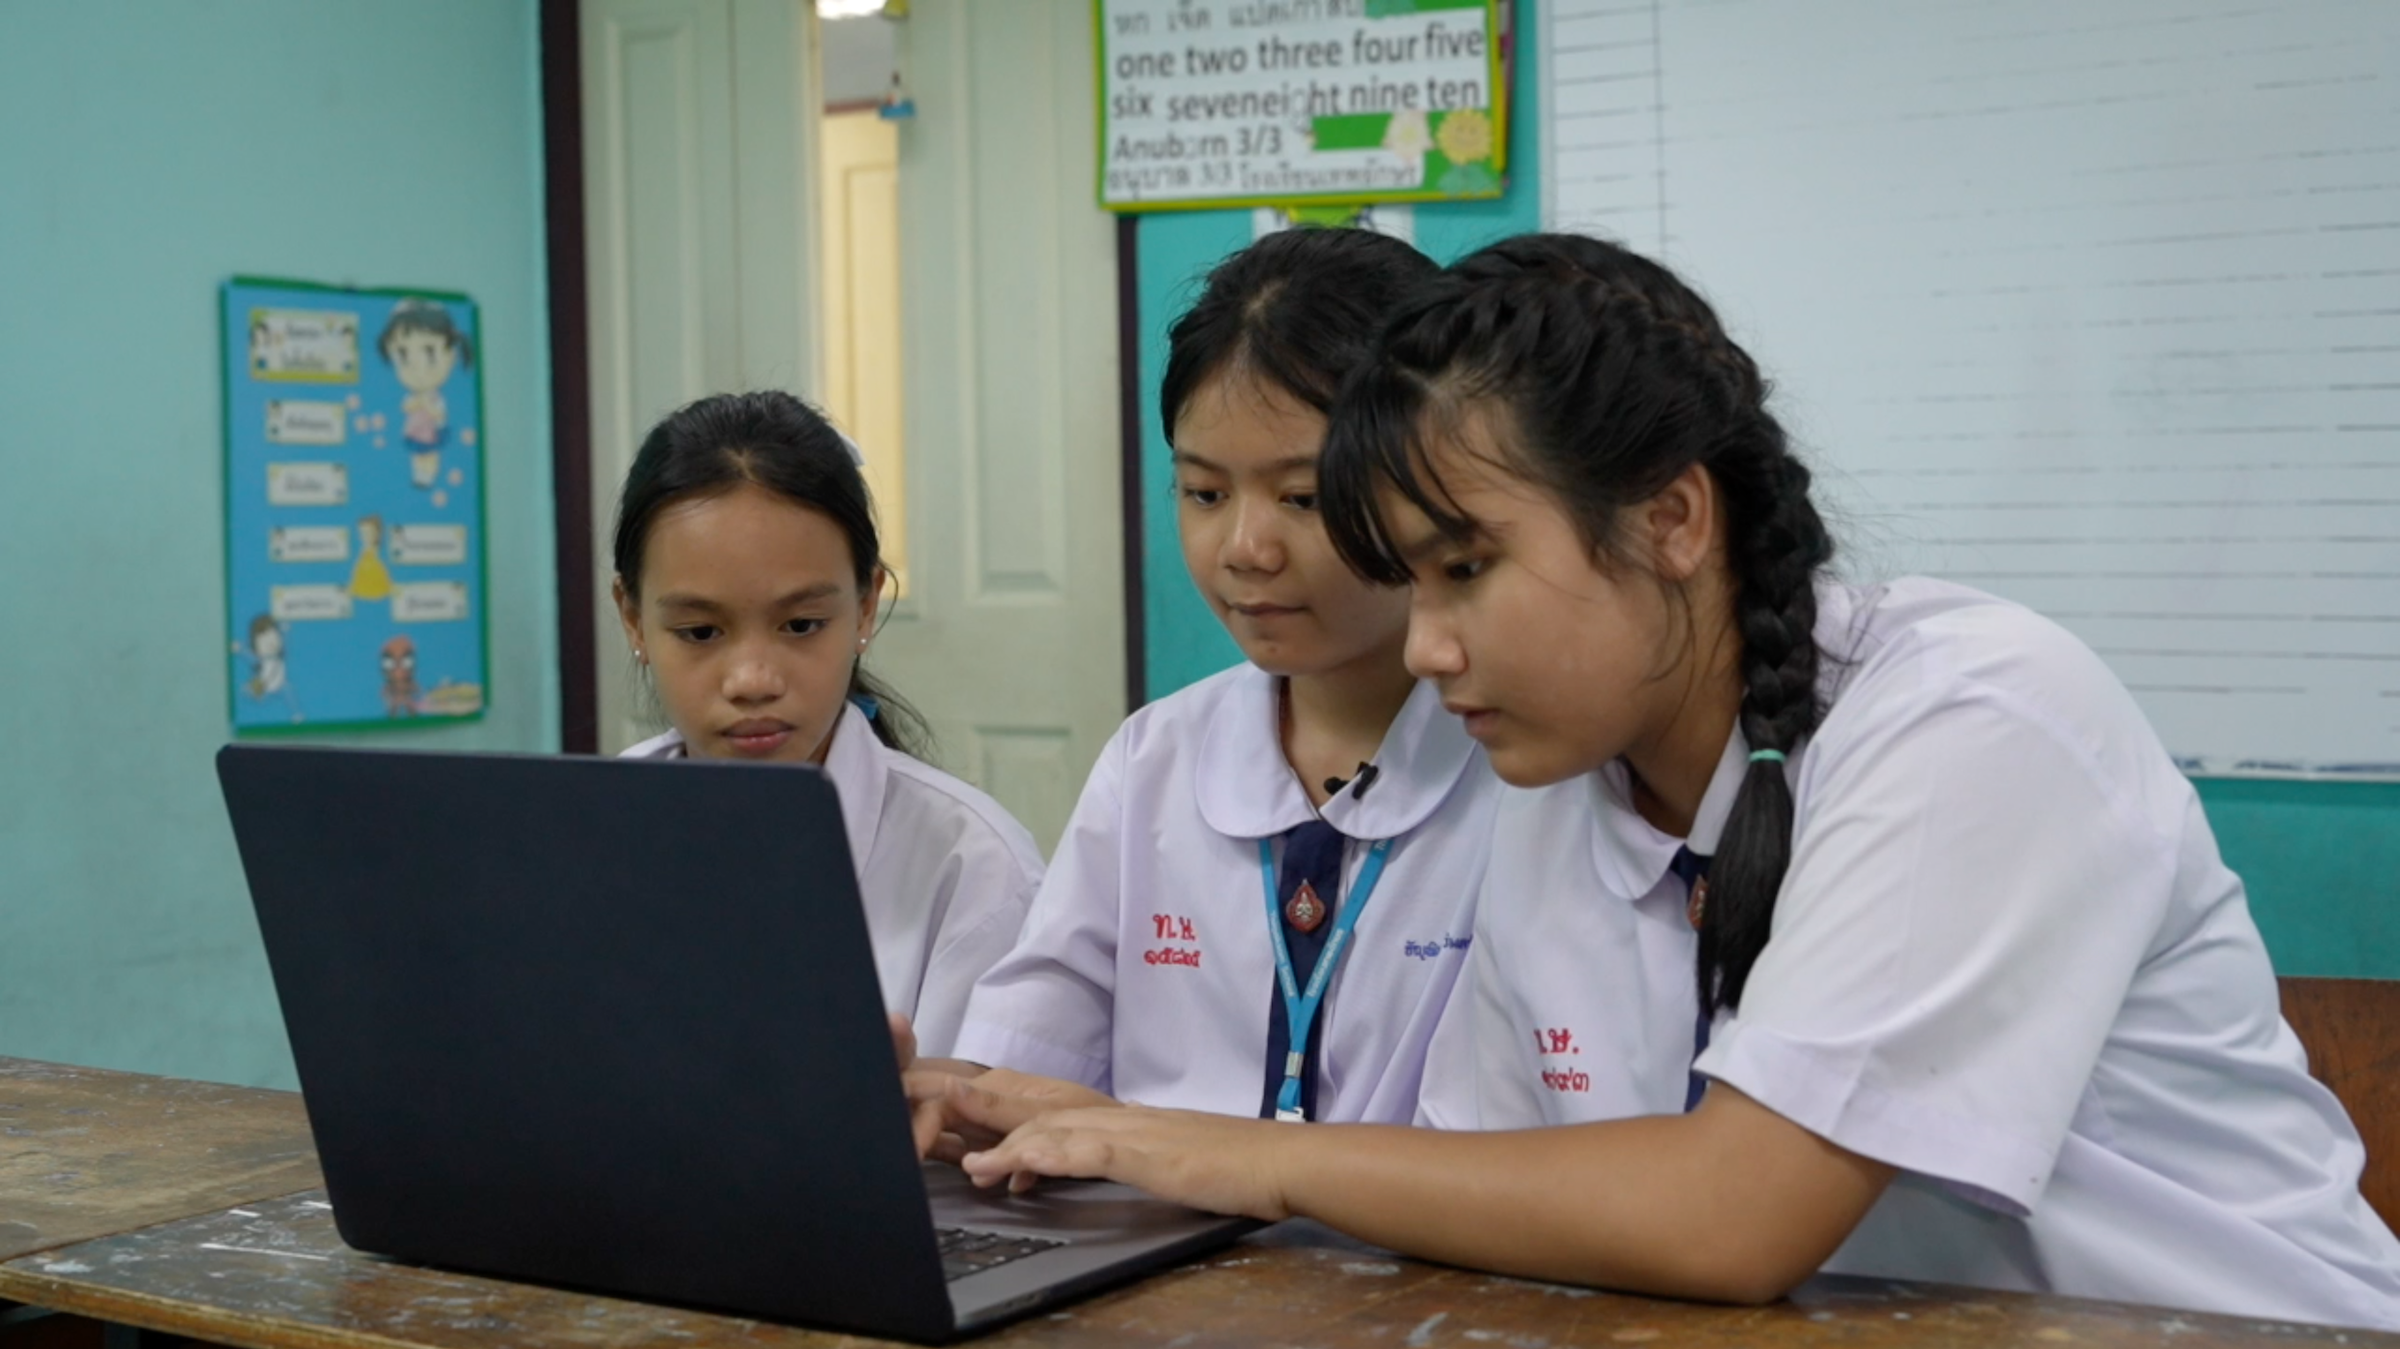 Children in Thailand watching videos with conspiracy theories on YouTube